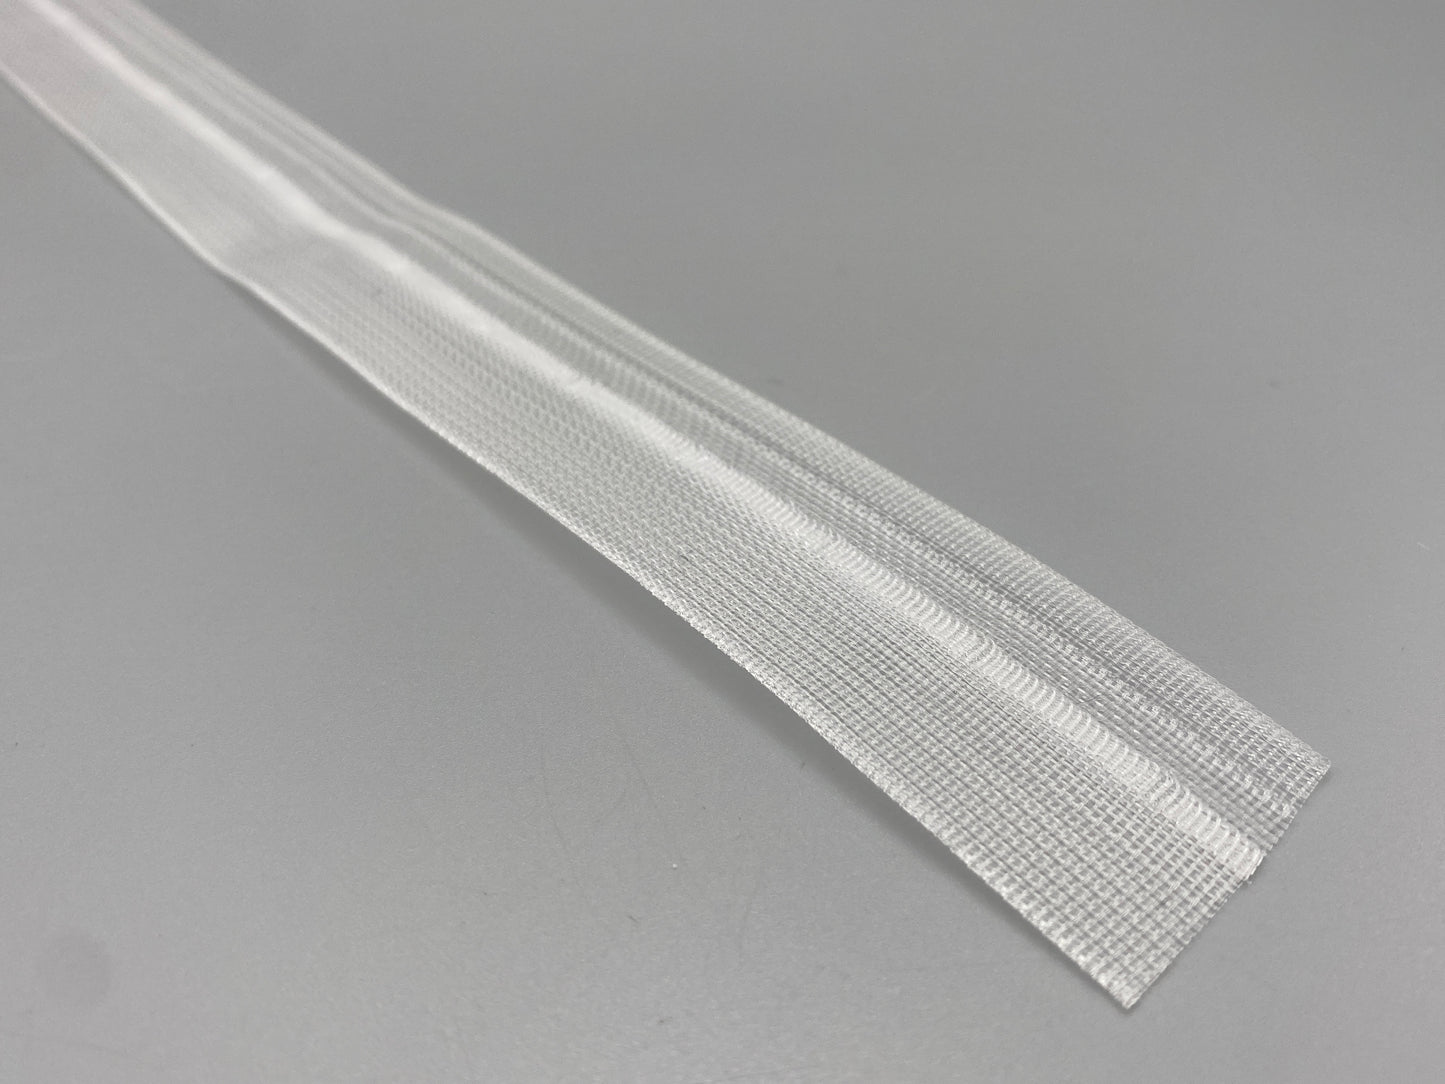 Clear Roman Blinds Lining Tape 18mm Wide - With Slots for Rings - 10meters